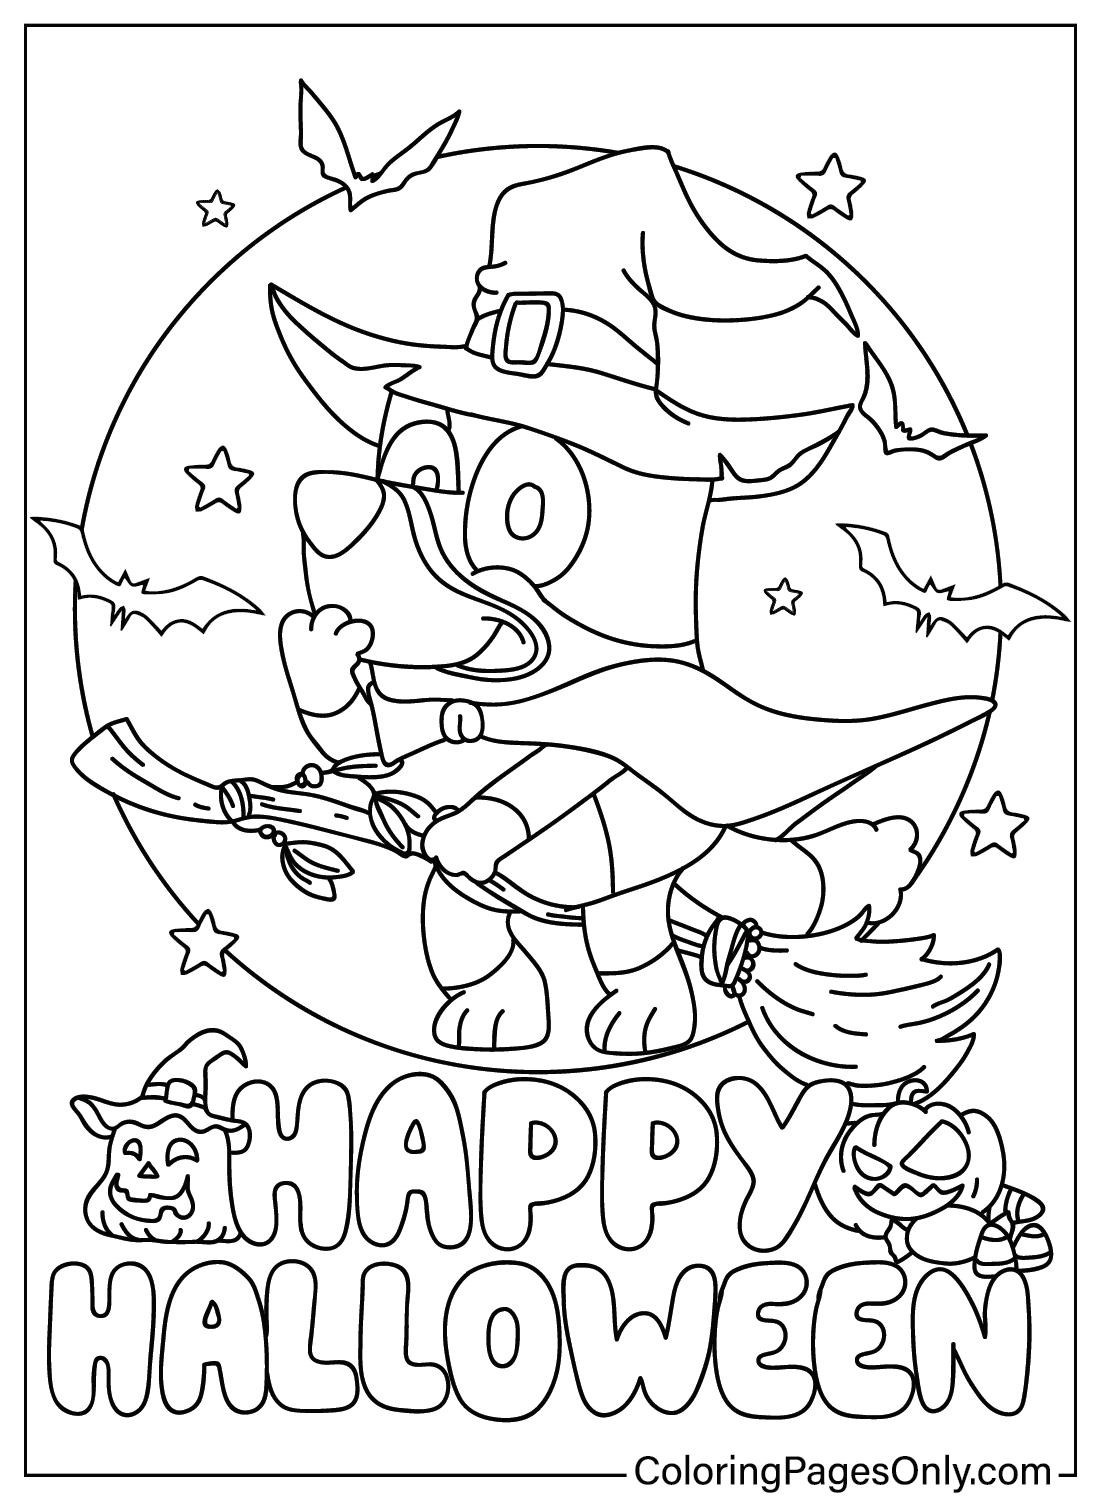 Bluey Halloween Coloring Pages to for Kids Free Printable Coloring Pages